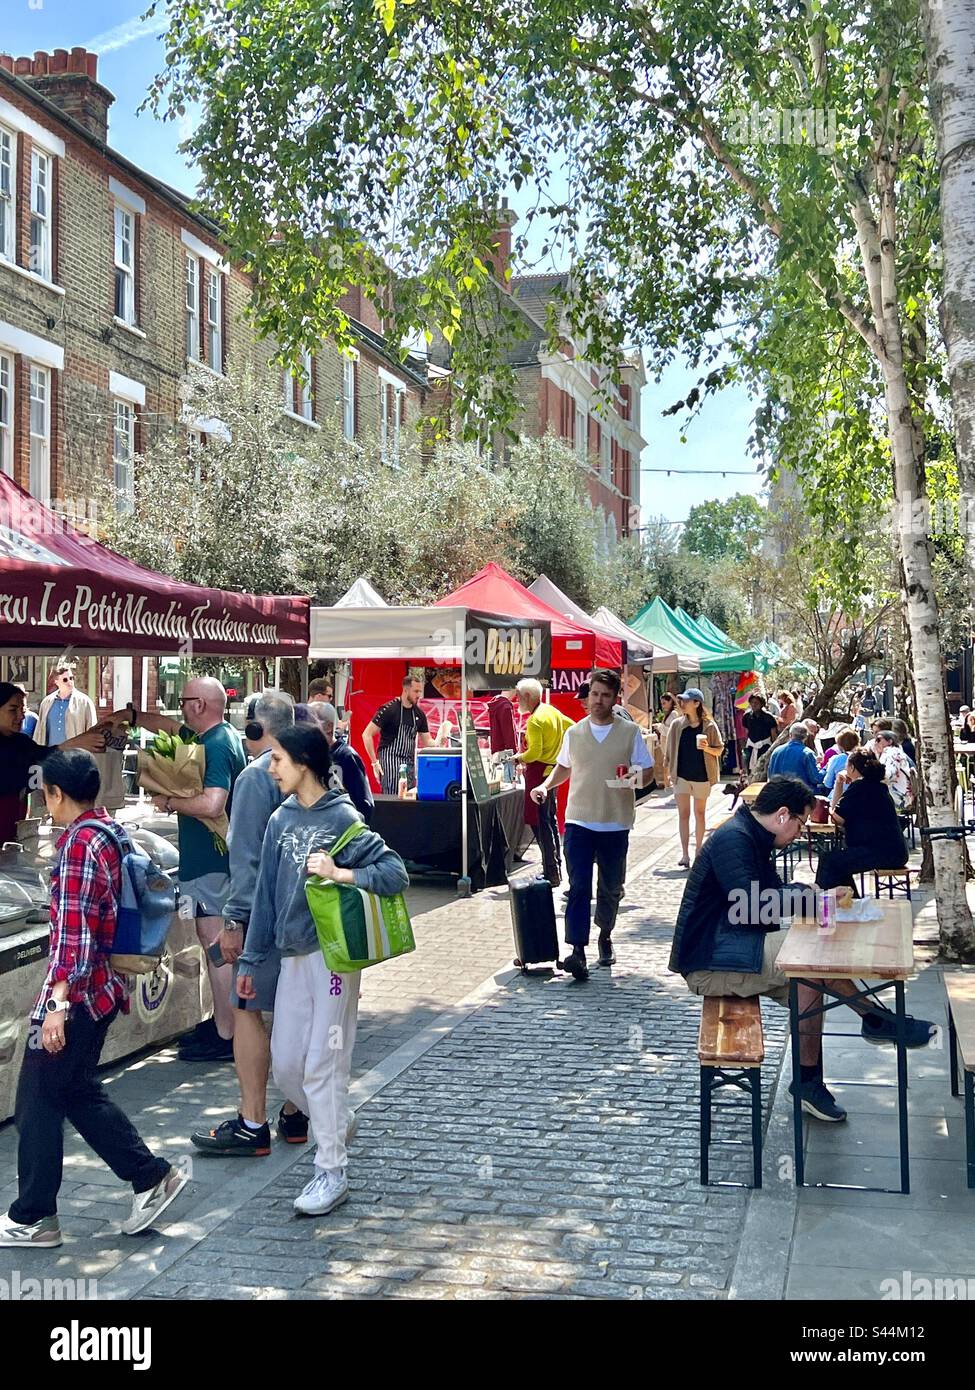 Venn Street farmers market in Clapham, London on a hot Saturday afternoon in summer Stock Photo